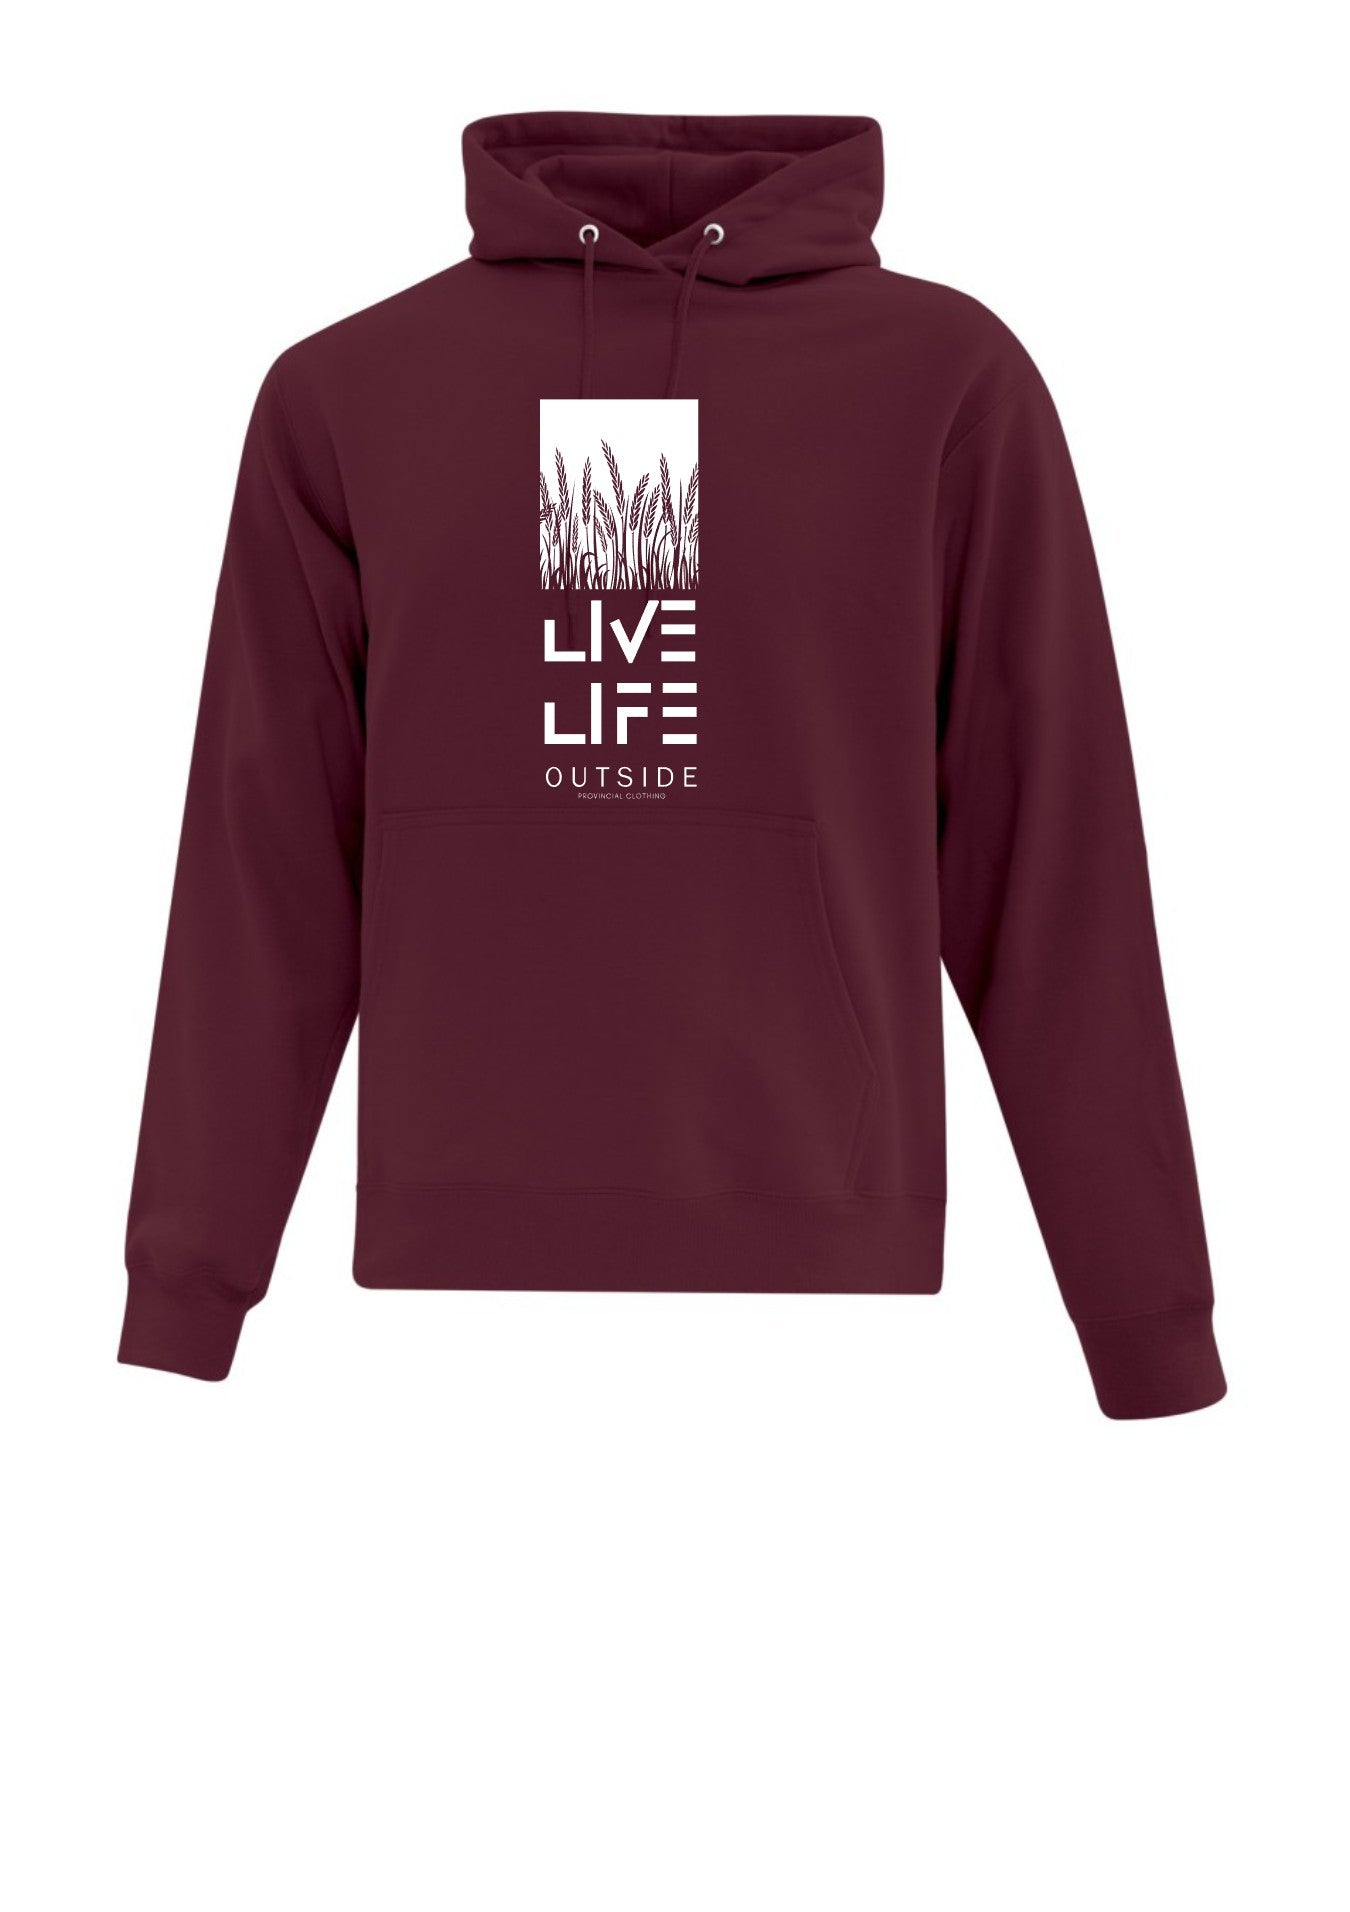 New* Live – *Brand WHEAT Outside- Provincial Hoodie Clothing Life